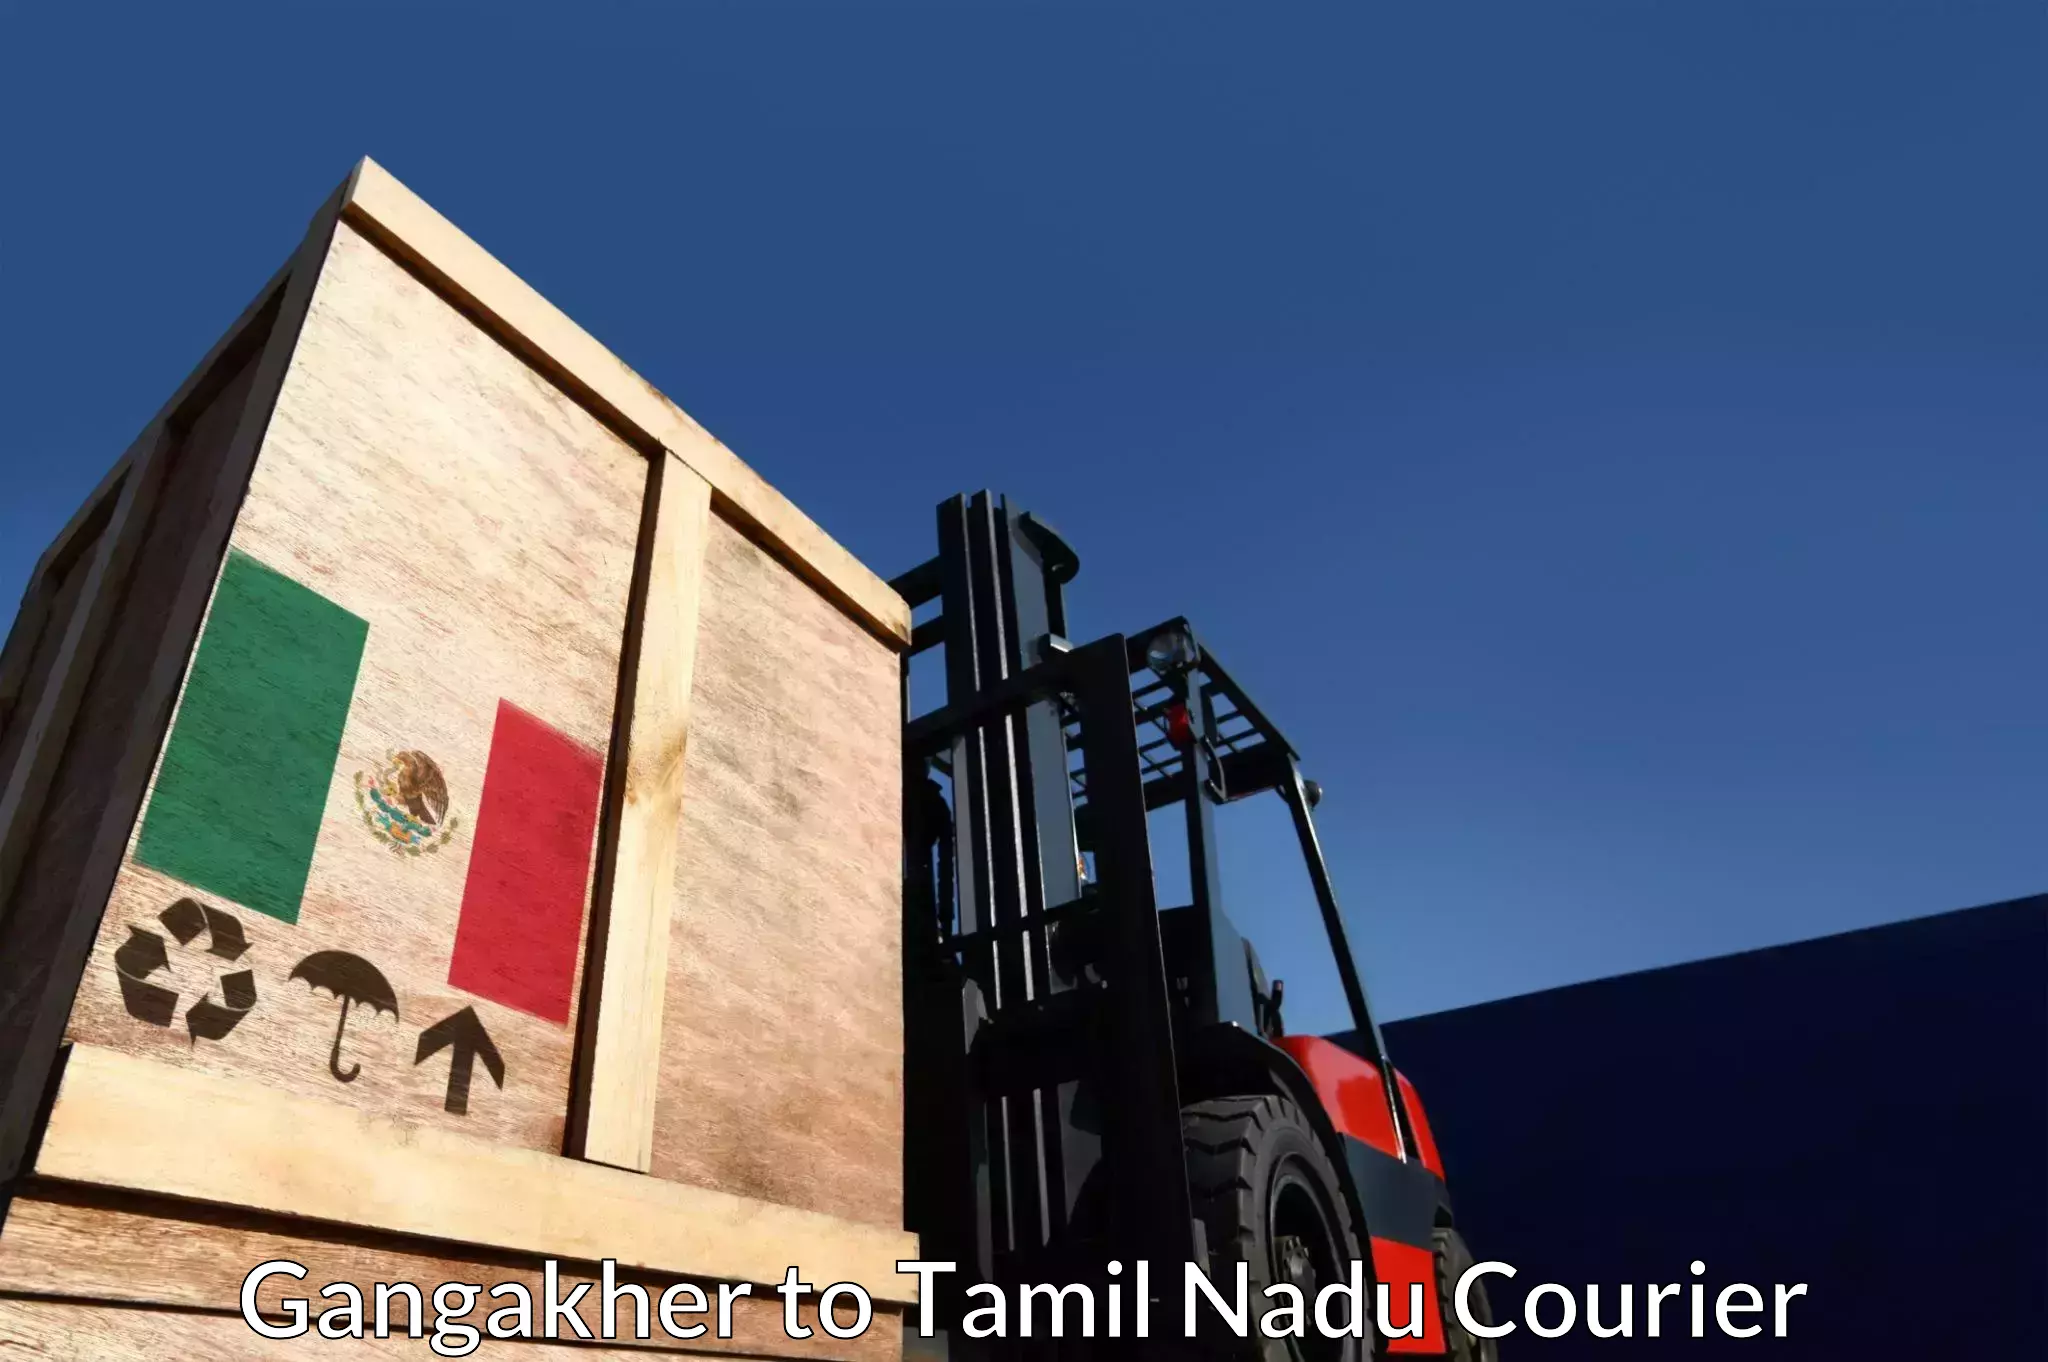 Express delivery capabilities Gangakher to Tamil Nadu